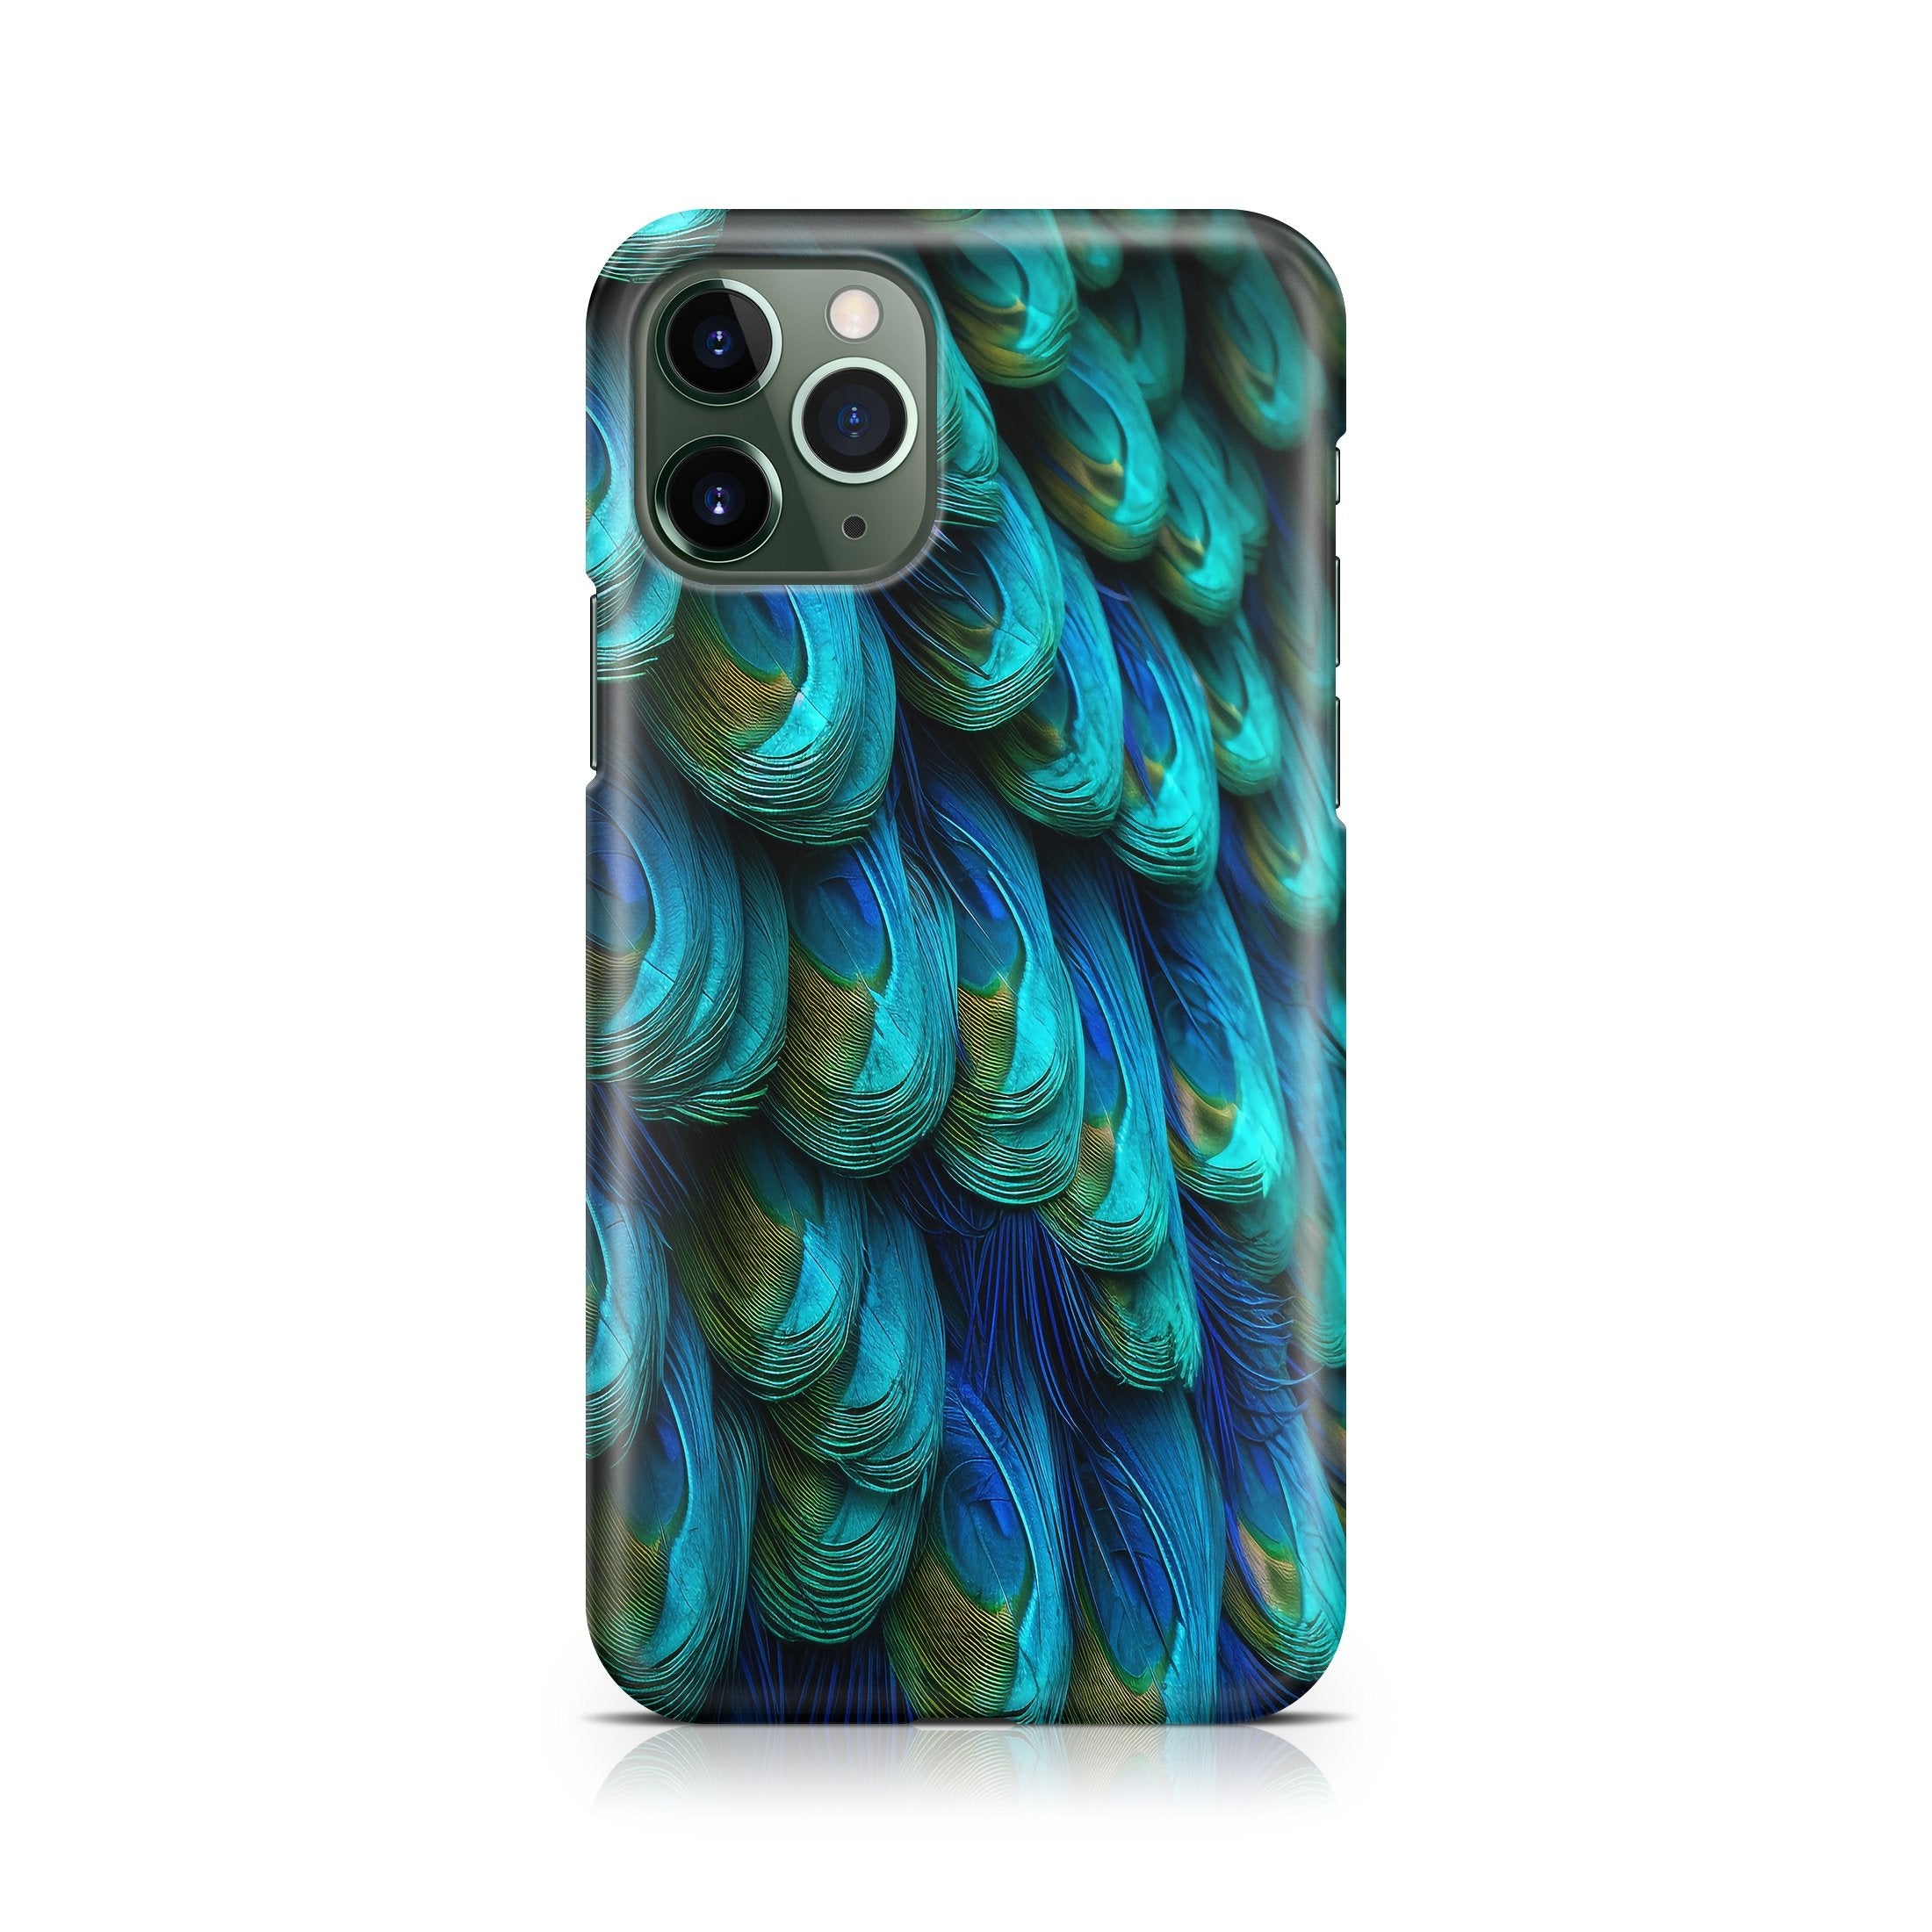 Specter Blue Dragonscale - iPhone phone case designs by CaseSwagger